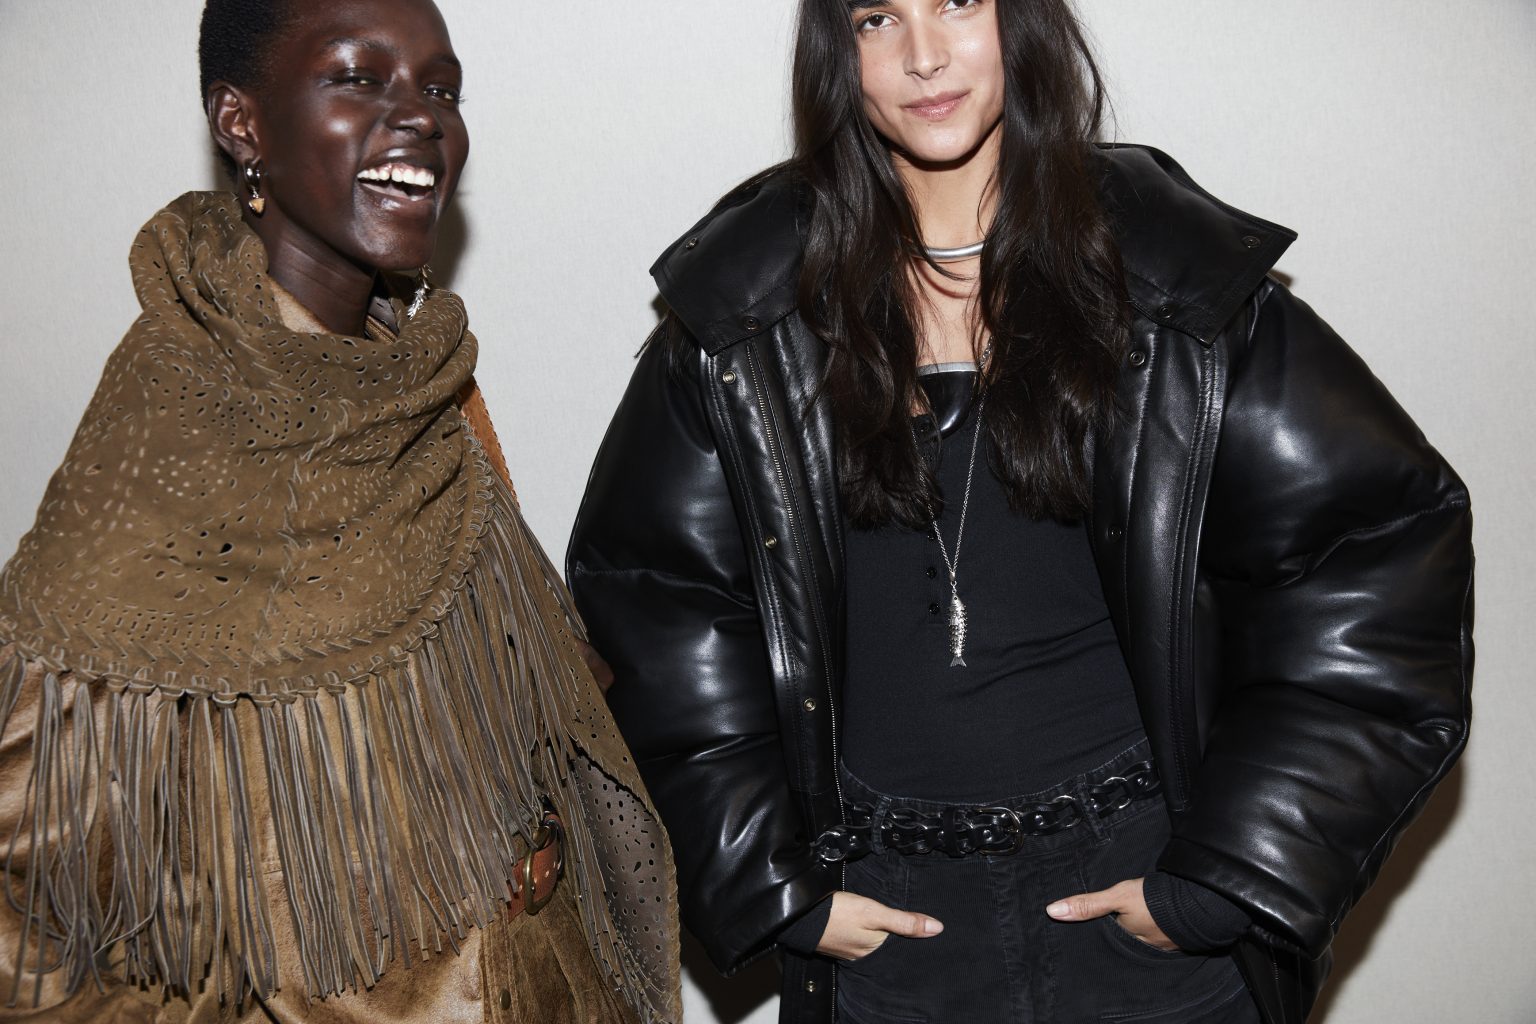 Cropped image of two models backstage, one in a brown fringed scarf and brown jacket, the other in a puffy black jacket.